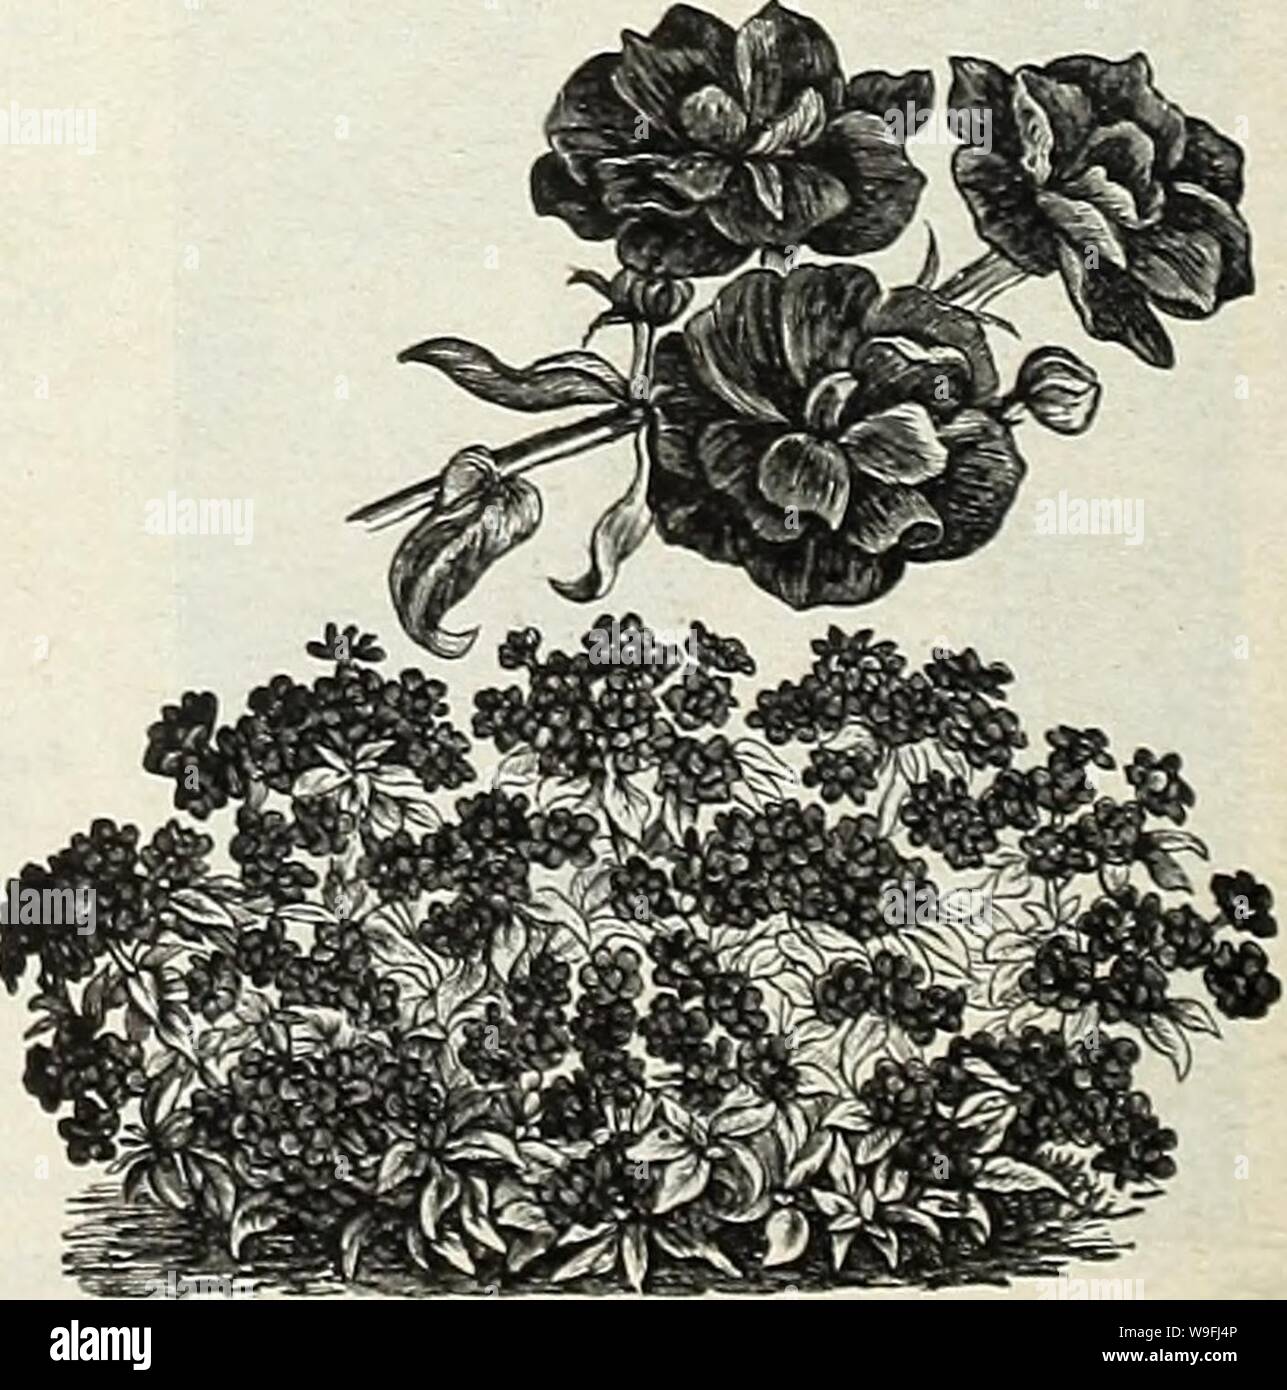 Archive image from page 45 of Currie's garden annual  spring. Currie's garden annual : spring 1931 56th year  curriesgardenann19curr Year: 1931 ( Hardy Perennial Phlox. LARGE-FLOWERING DWARF PHLOX A type combining the size of the individual flower and head of the finest Grandifloras, but of dwarf, compact growth, a perfect combination; and while they do not come in the large variety of colors found in the taller-growing sorts, they will be found very effective for beds, borders, etc., etc. 6 inches. Finest Mixed Colors—Pkt., 10c;  oz., 75c. HARDY PERENNIAL PHLOX (P. DECUSSATA) Hardy herbaceous Stock Photo